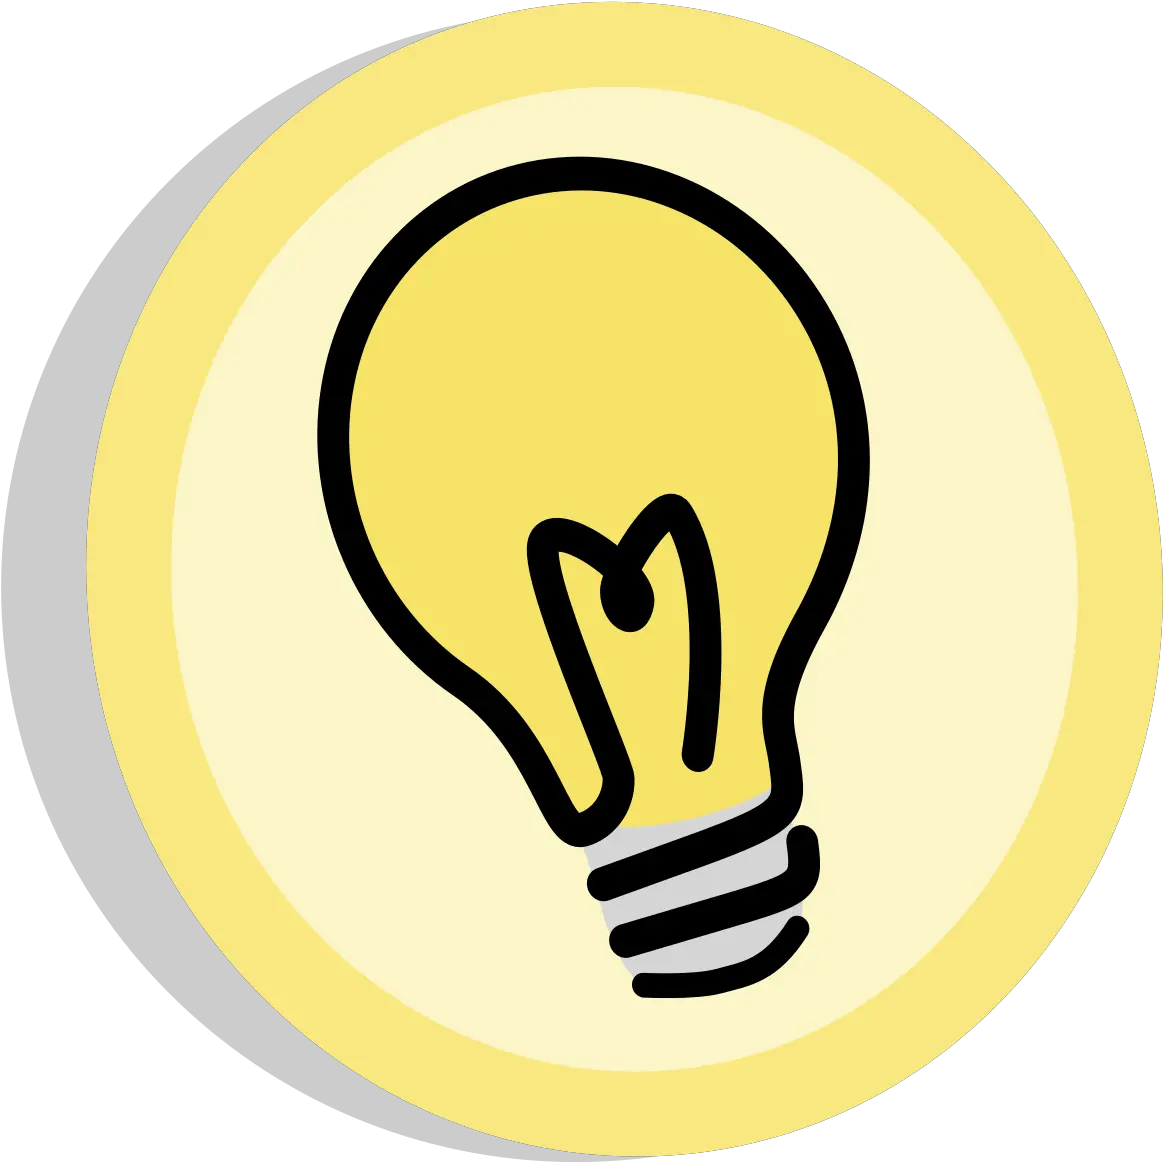 Filesymbol Lightbulbsvg Wikimedia Commons Ethical Use Of Information Png Bulb Icon